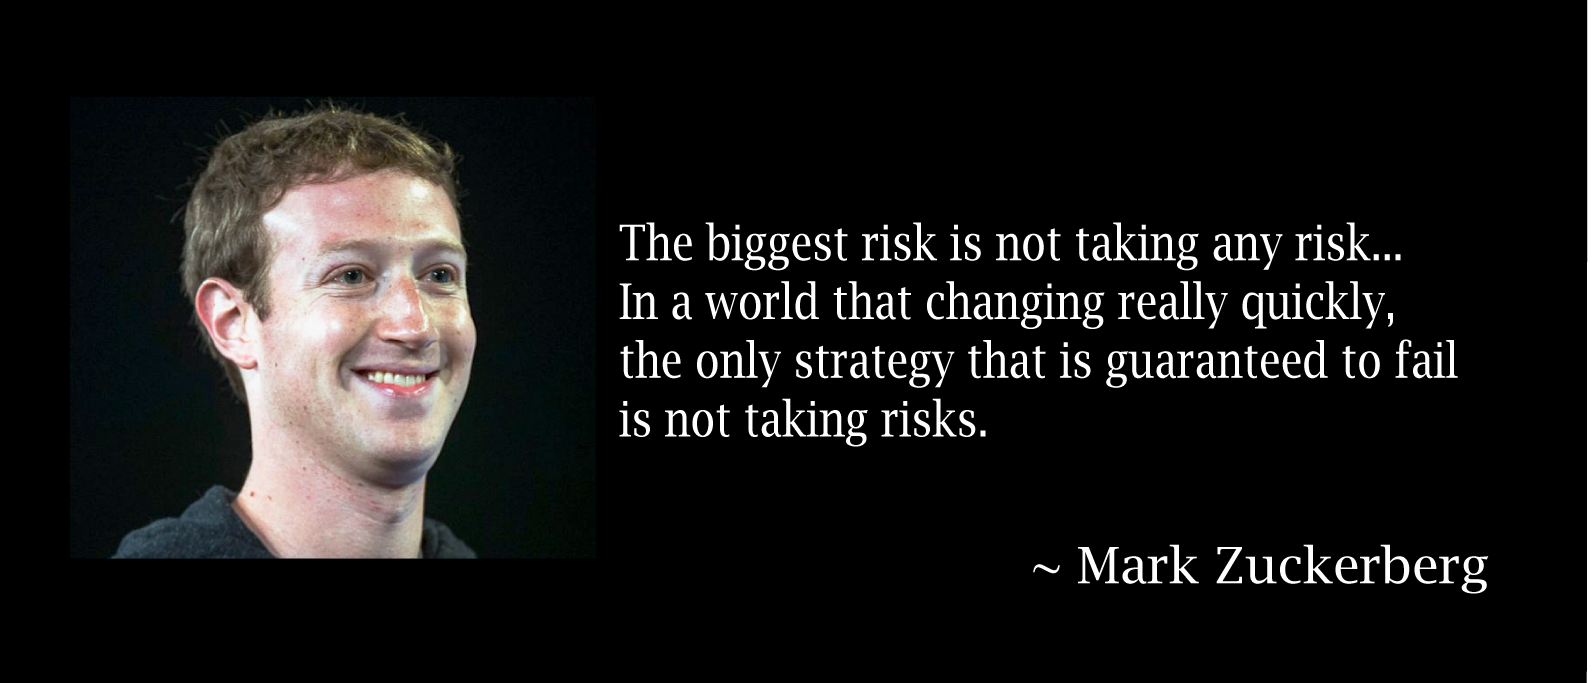 My 10 Best Quotes On Risk-Taking Today – Knowledge Vault